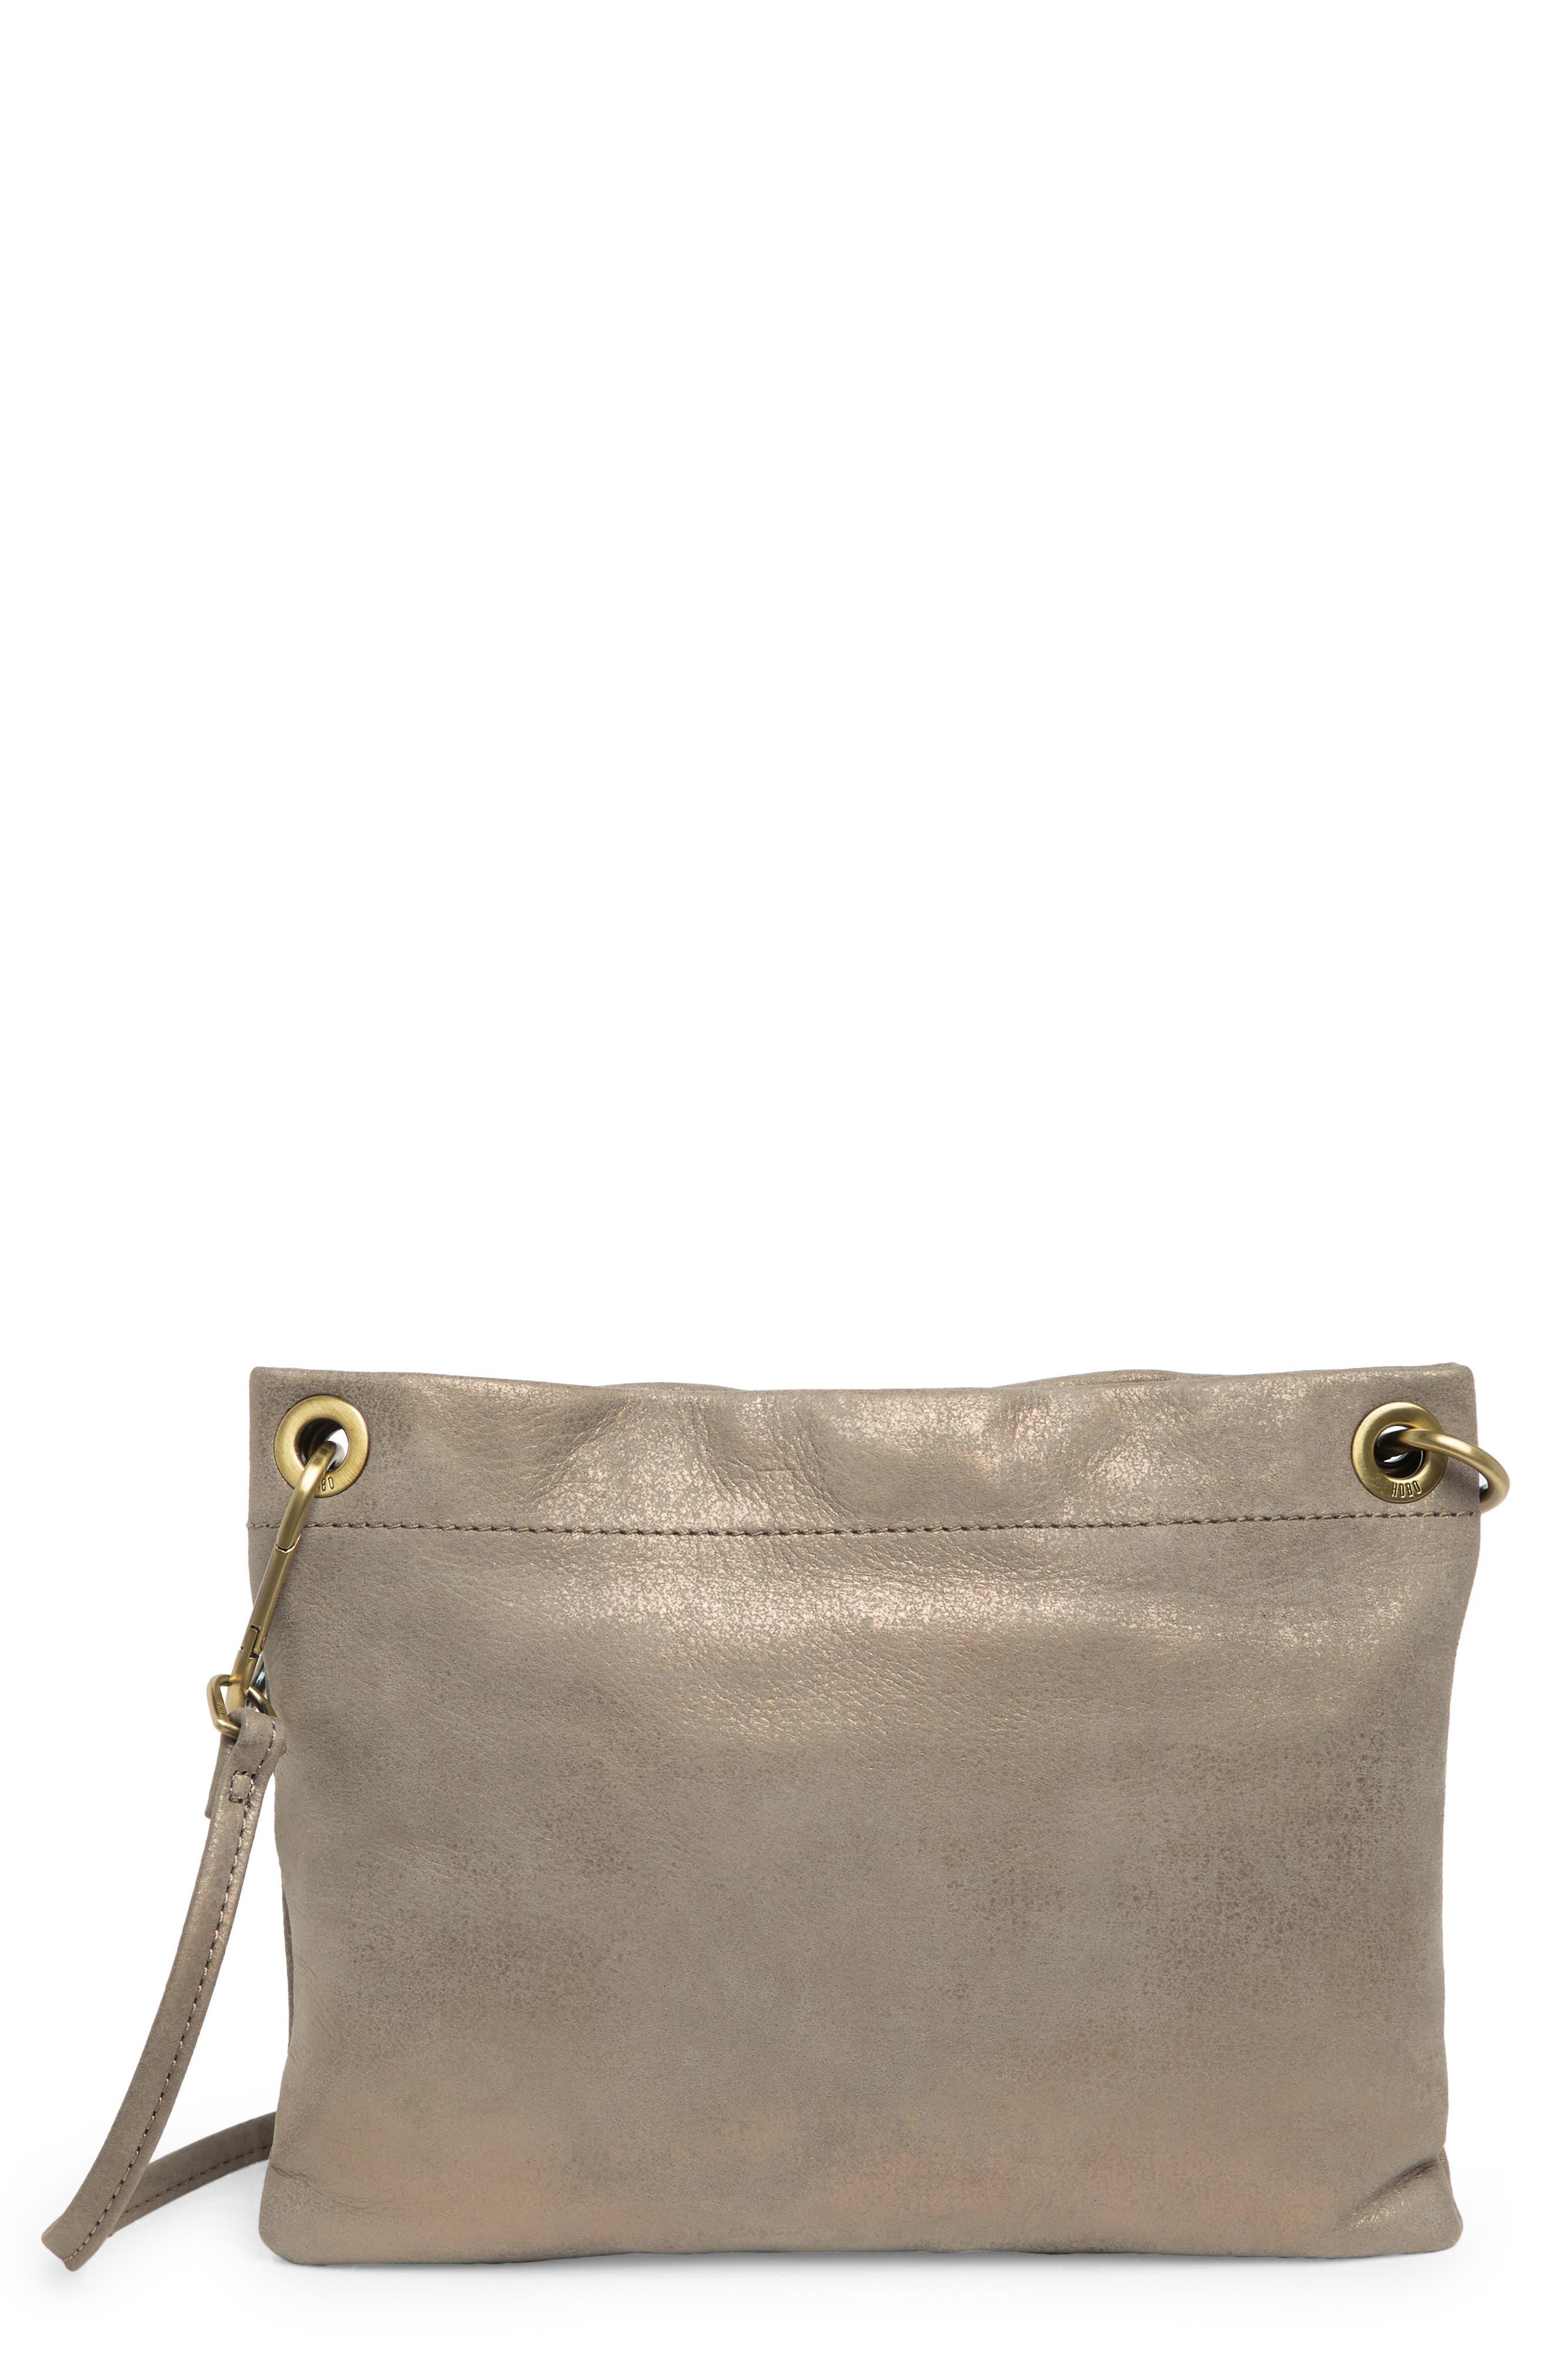 Hobo International Every Convertible Leather Crossbody Bag in Gray | Lyst